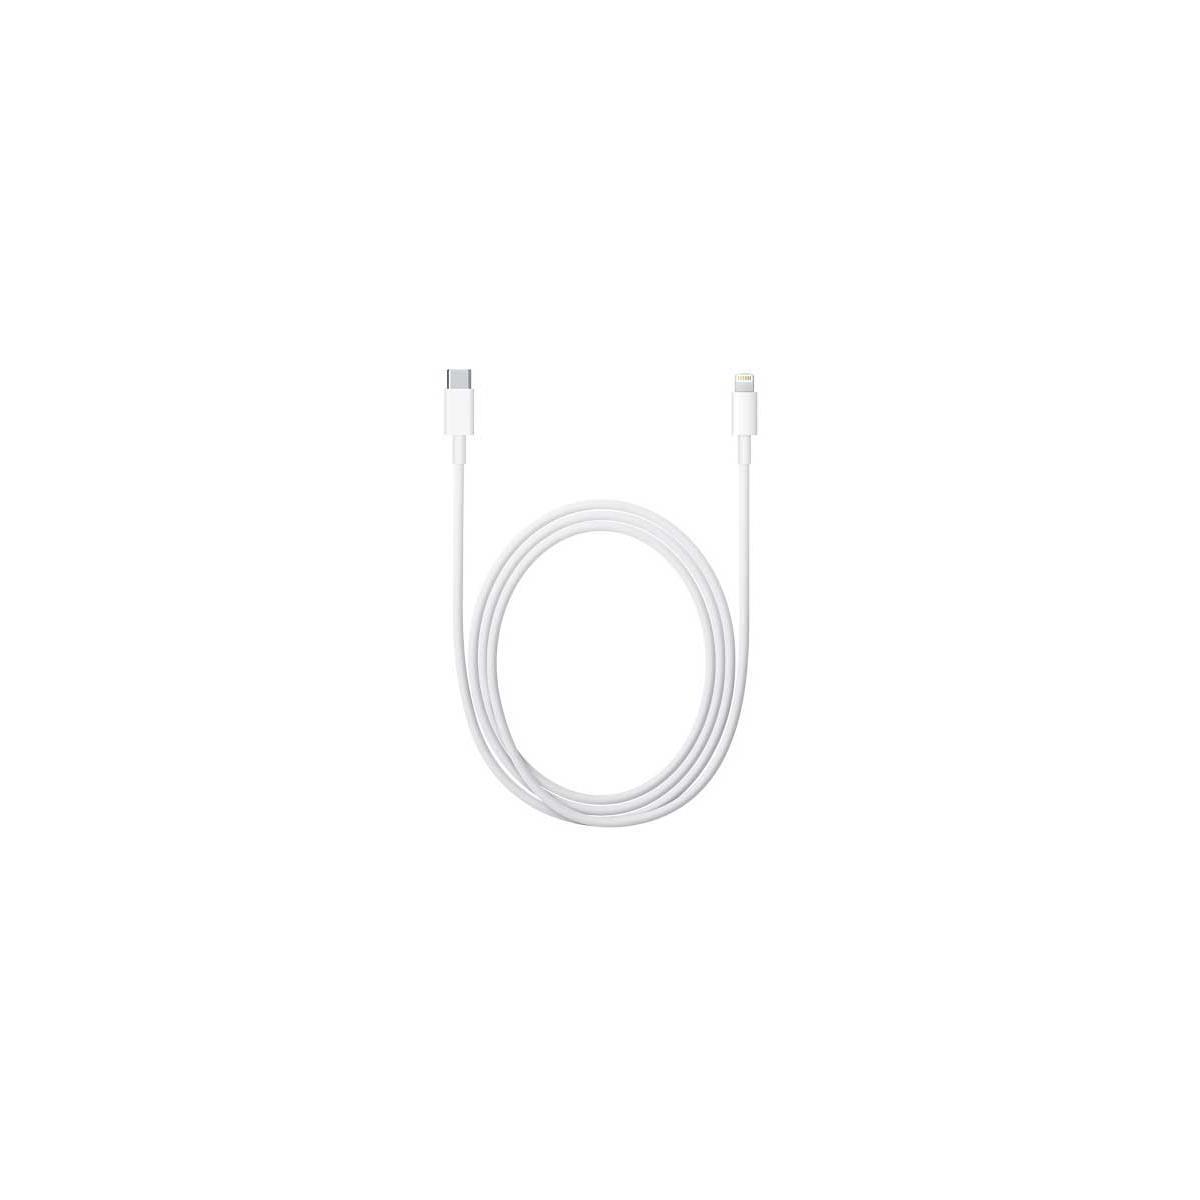 Image of Apple 1m / 3.28' USB-C to Lightning Cable